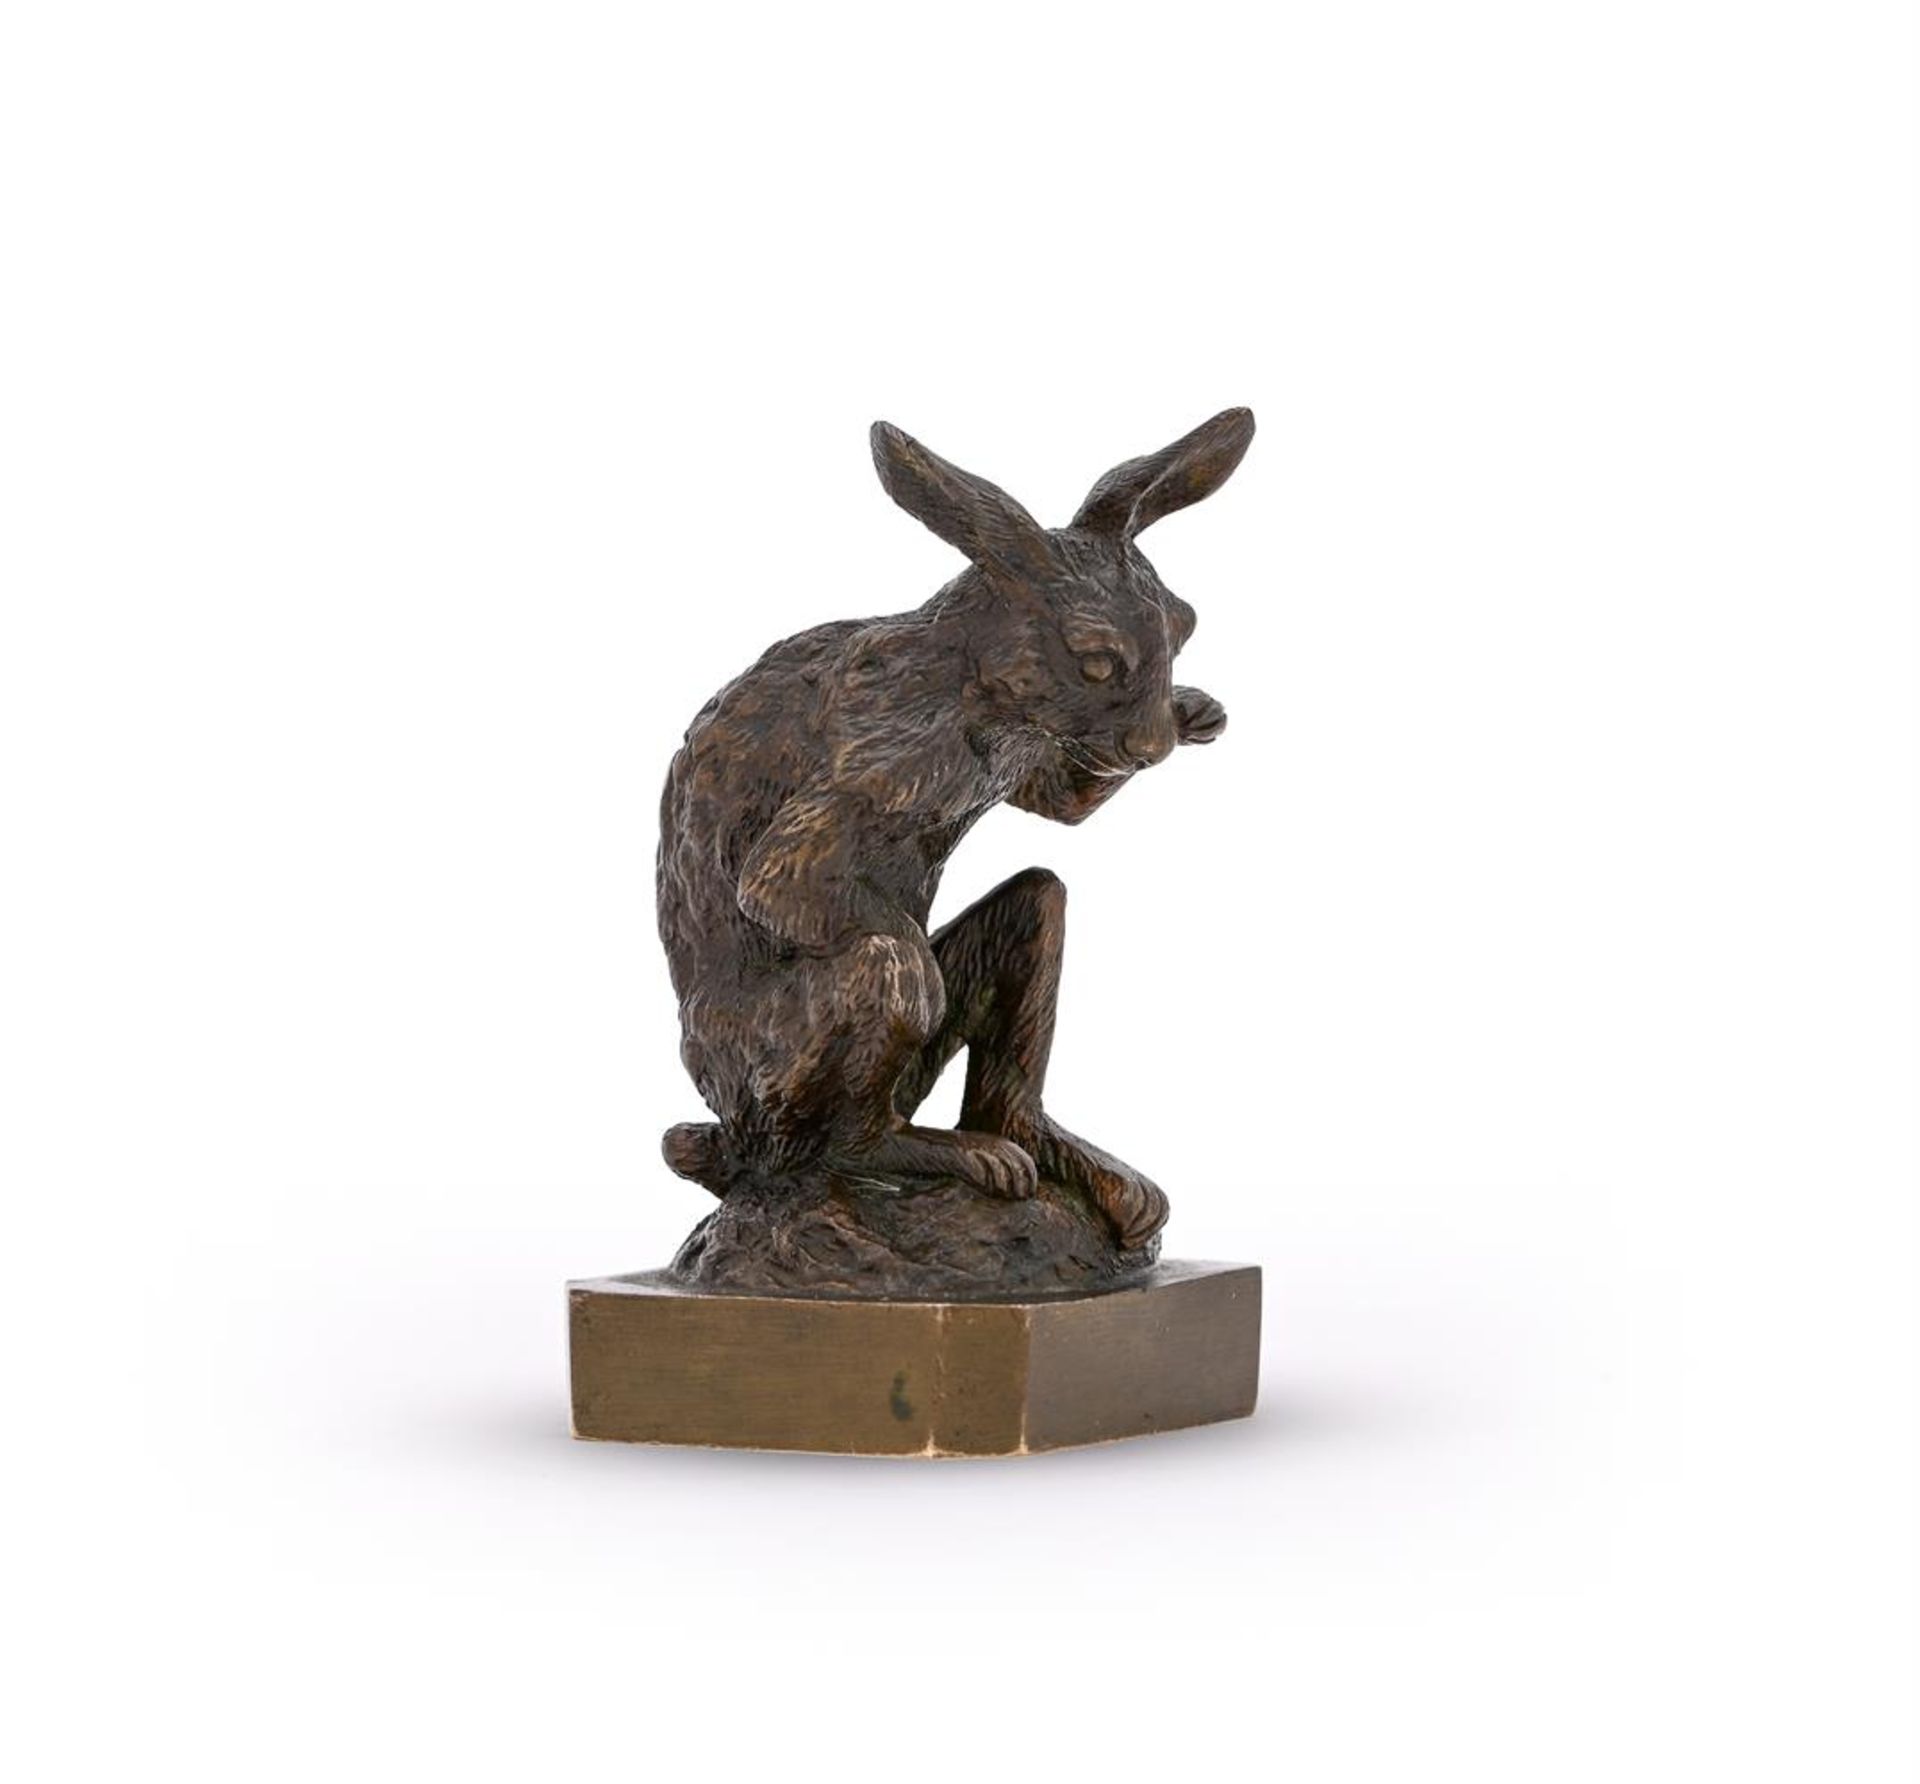 CHRISTOPHE FRATIN (FRENCH, 1801-1864), A BRONZE MODEL OF A HARE GROOMING ITS FACE - Image 3 of 6